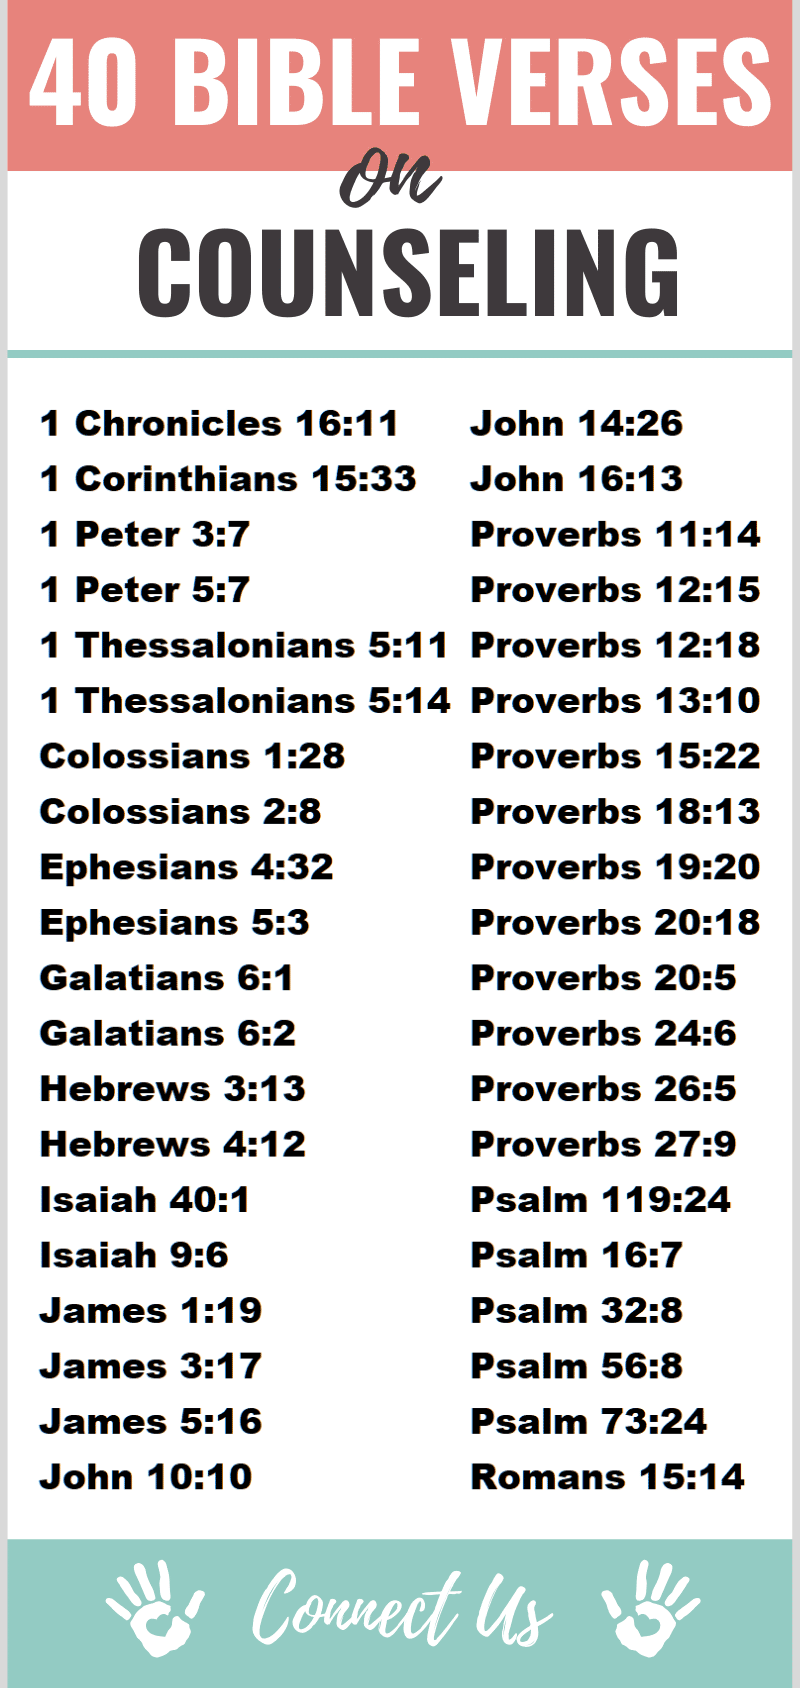 Bible Verses on Counseling